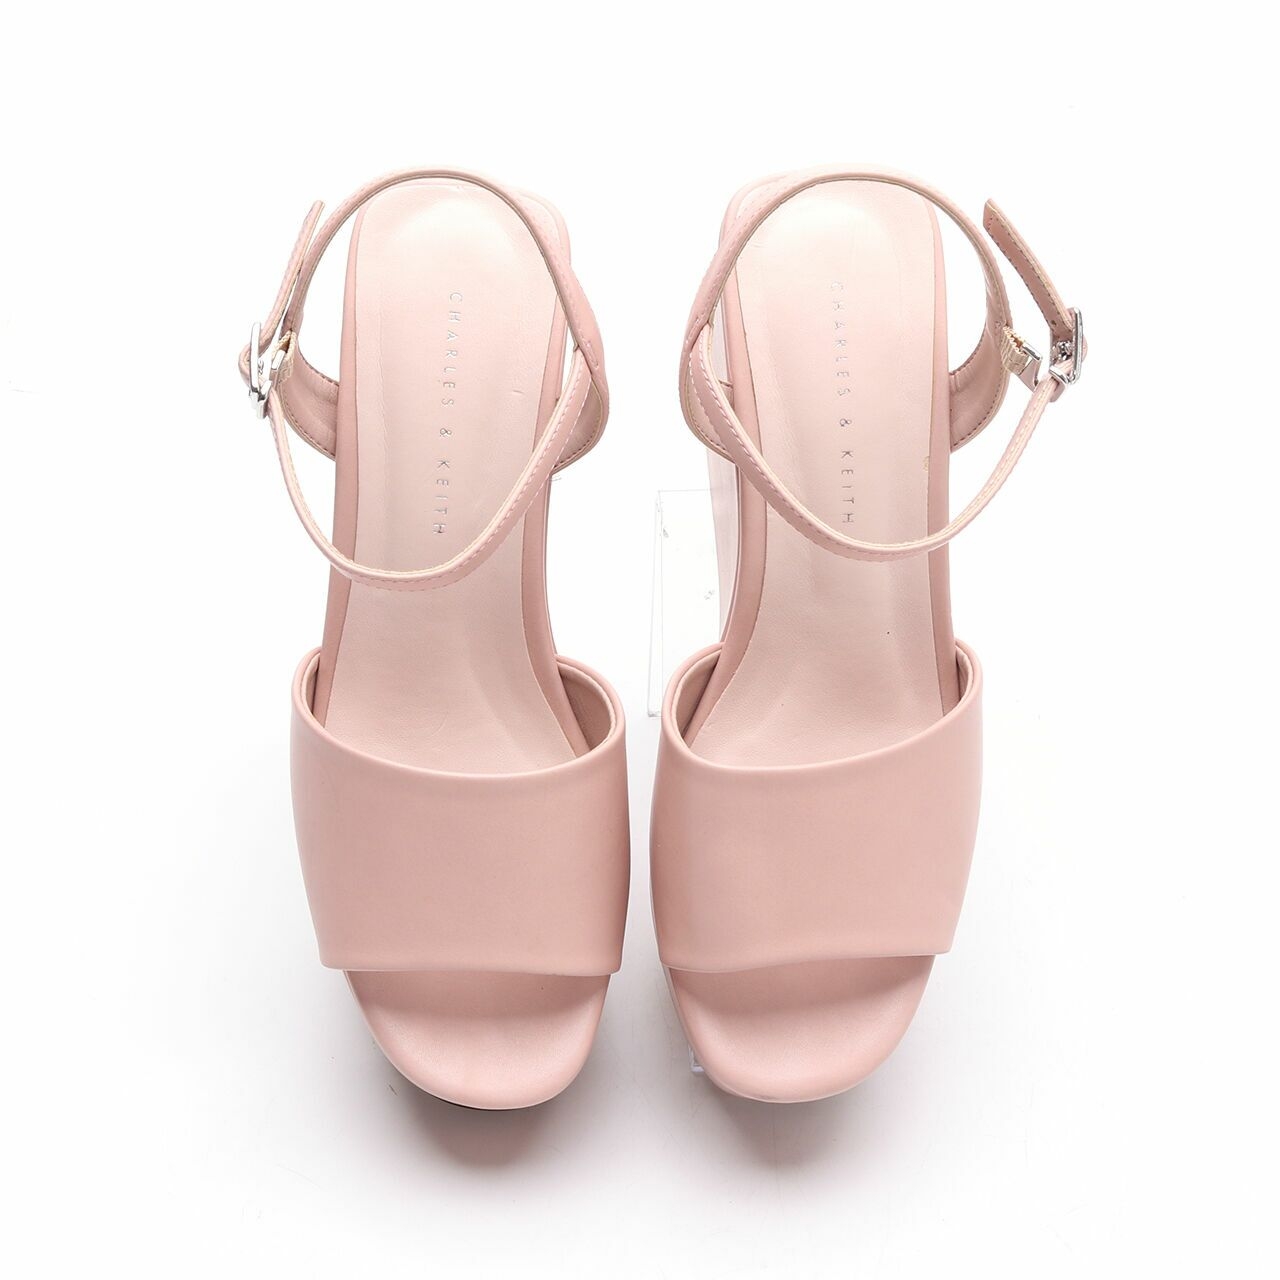 Charles & Keith Dusty Pink Wedges